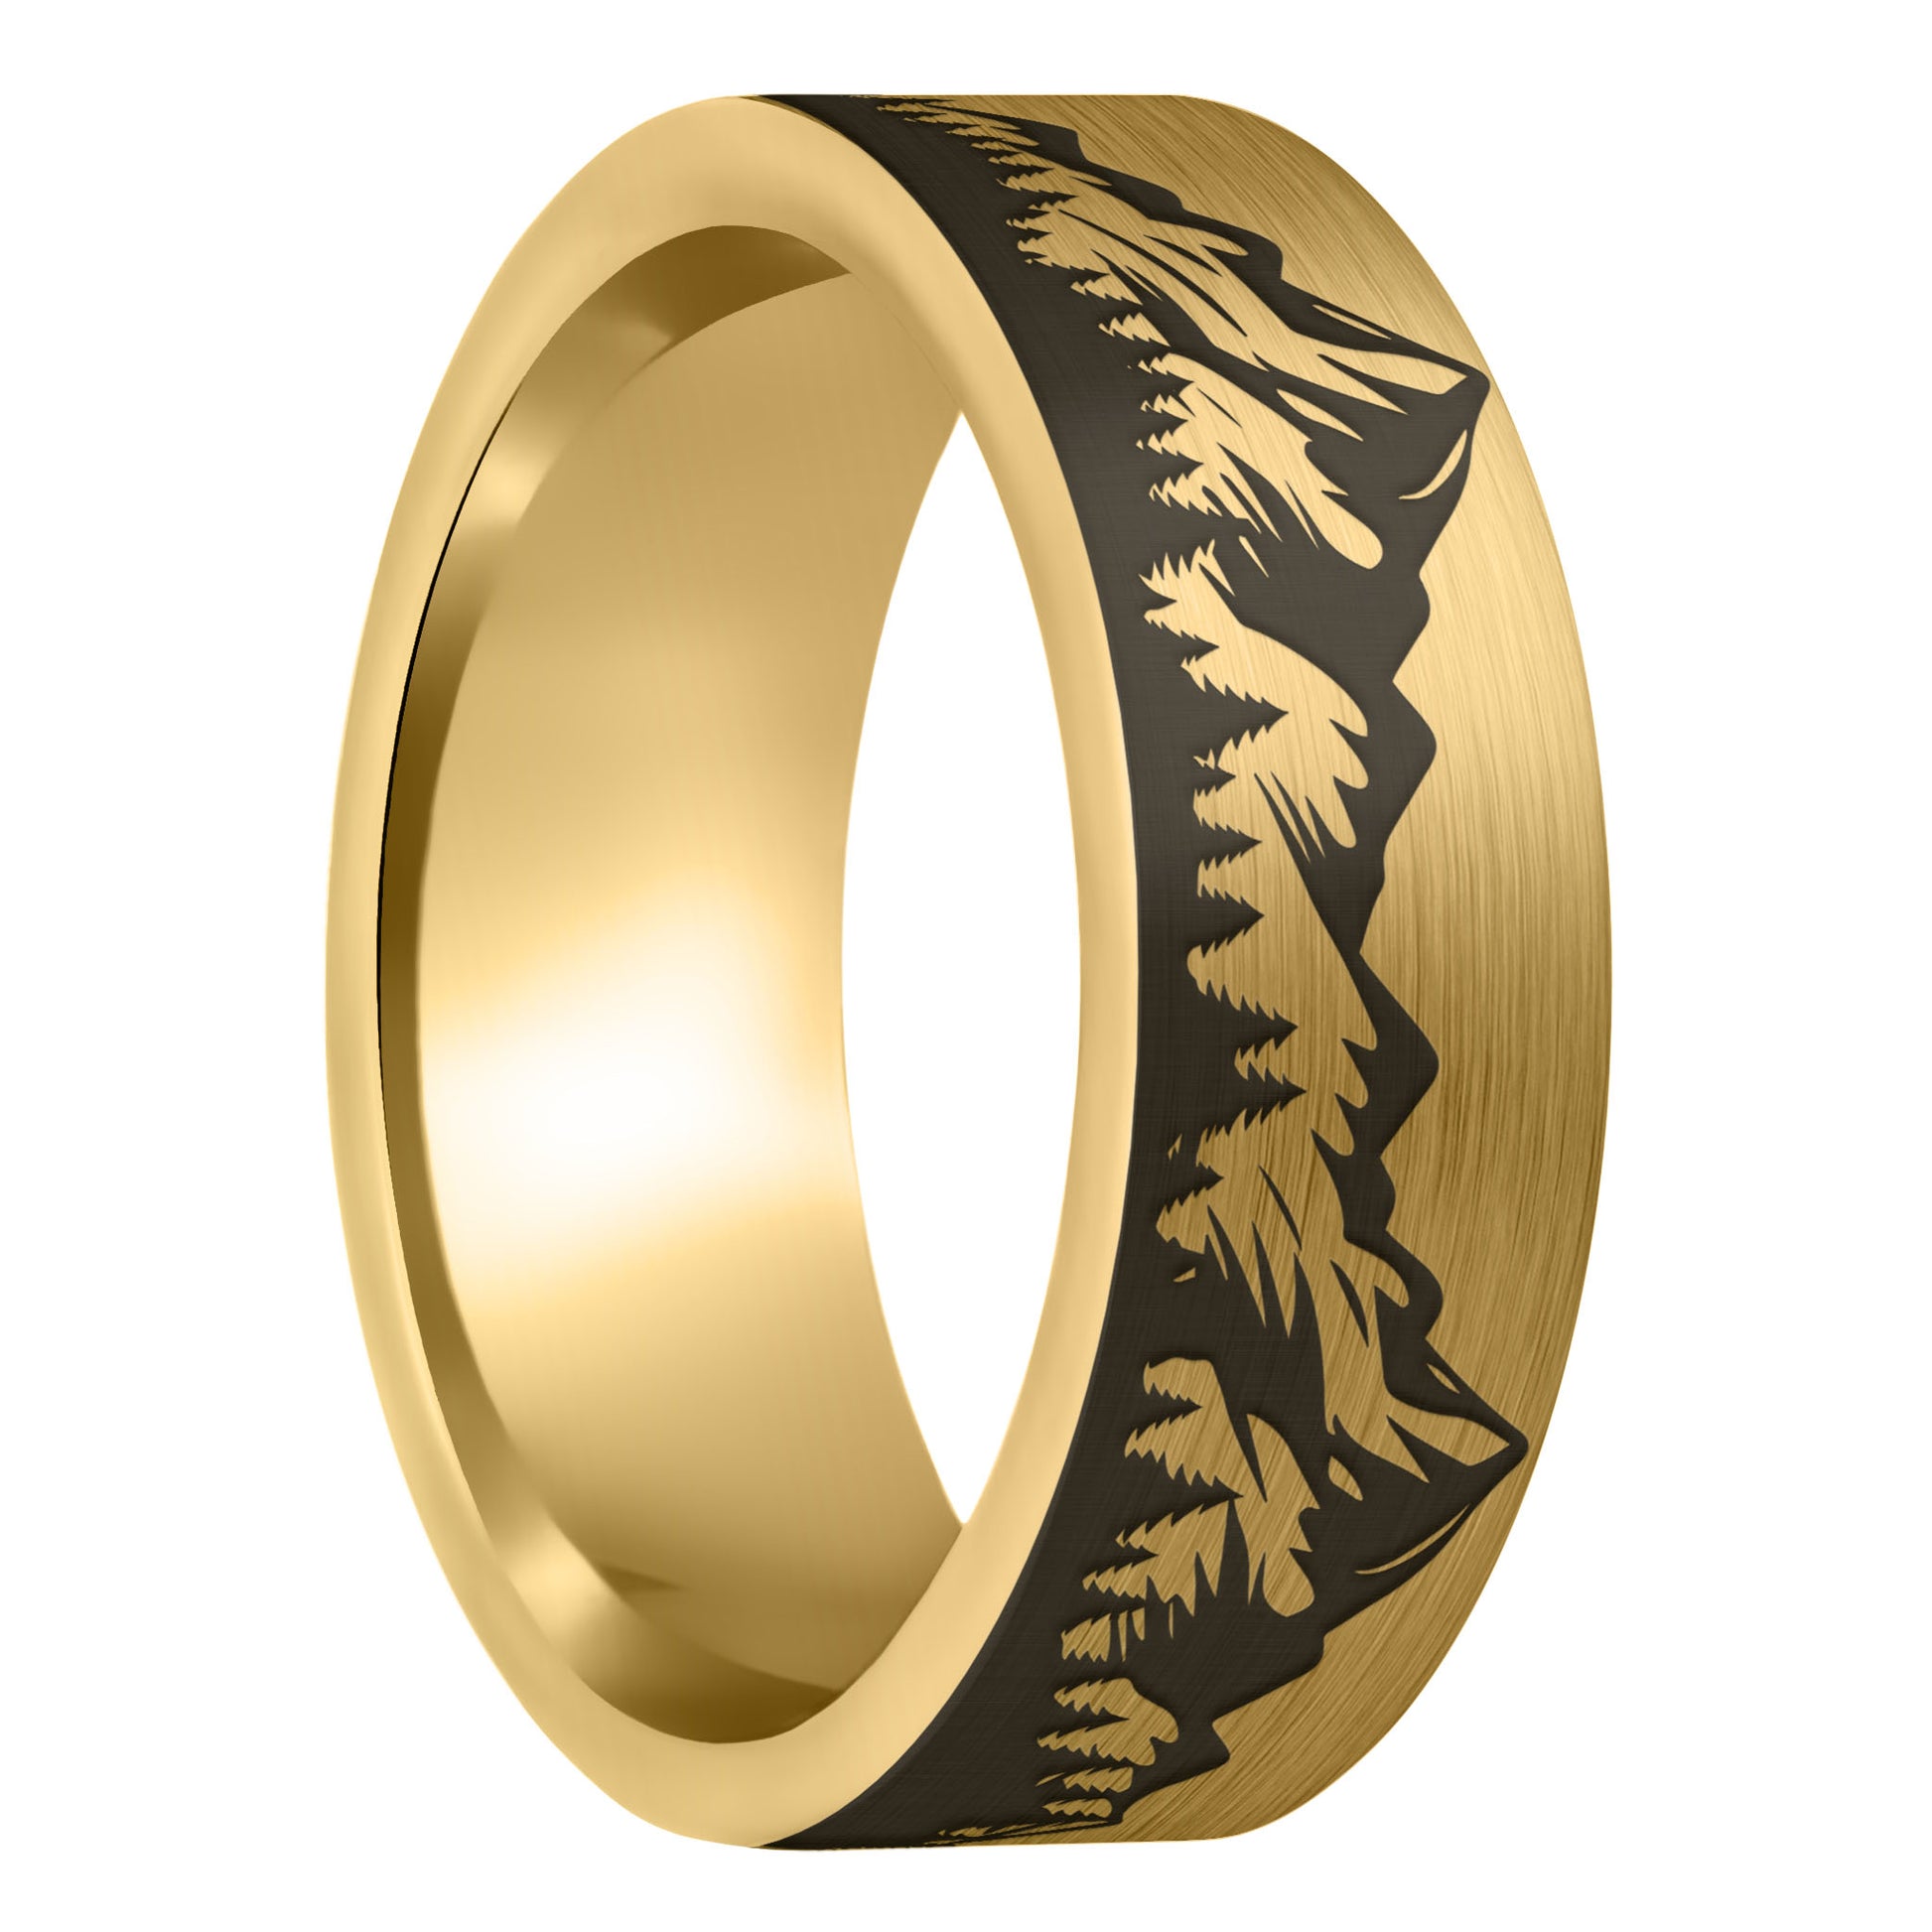 A mountain range forest brushed gold tungsten men's wedding band displayed on a plain white background.